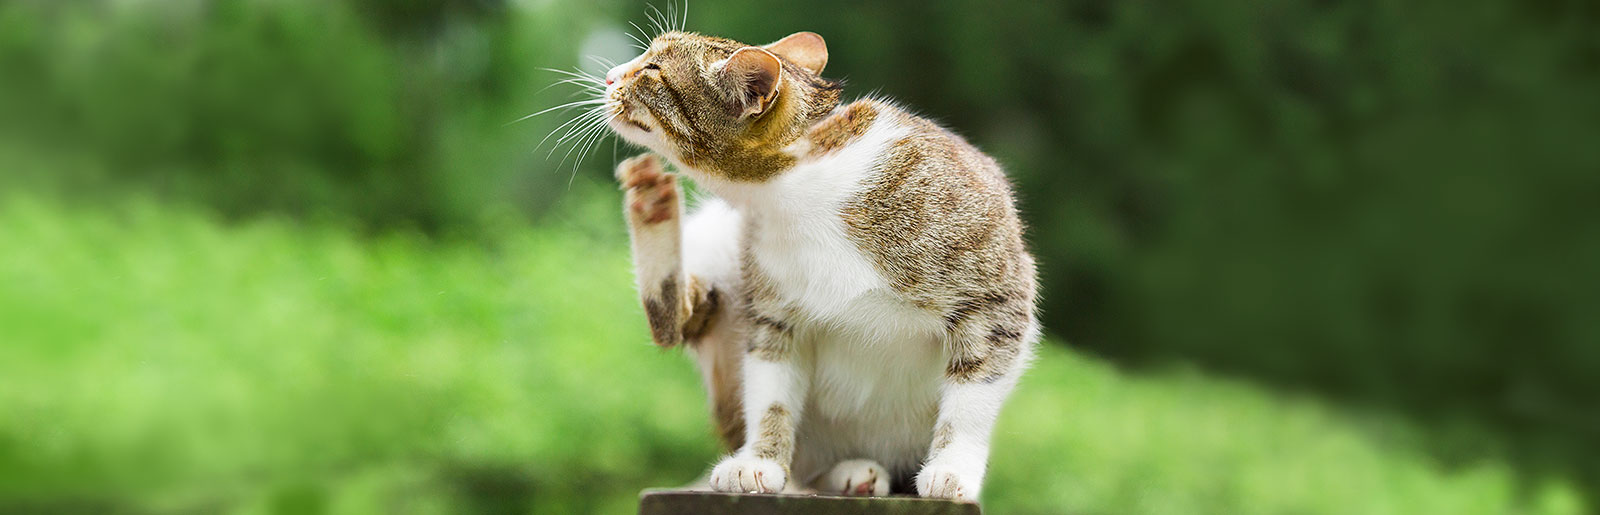 Itching and rash as a symptom of food allergy in cats